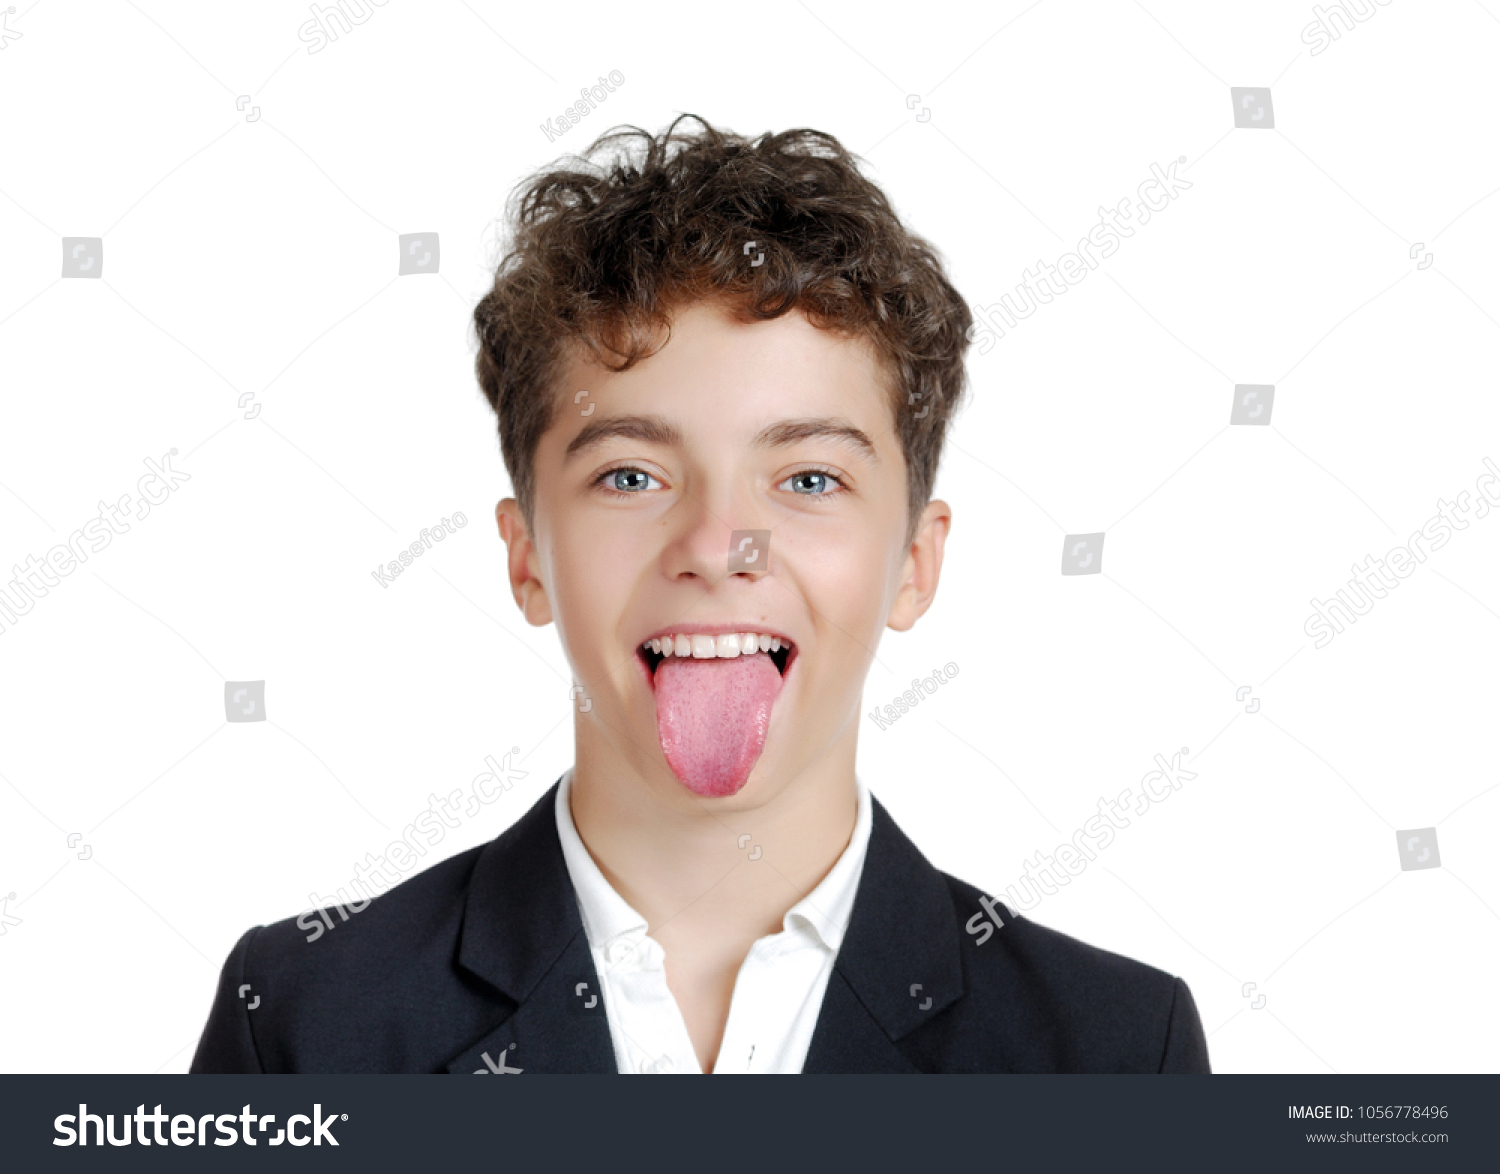 Gettin some head great tongue image